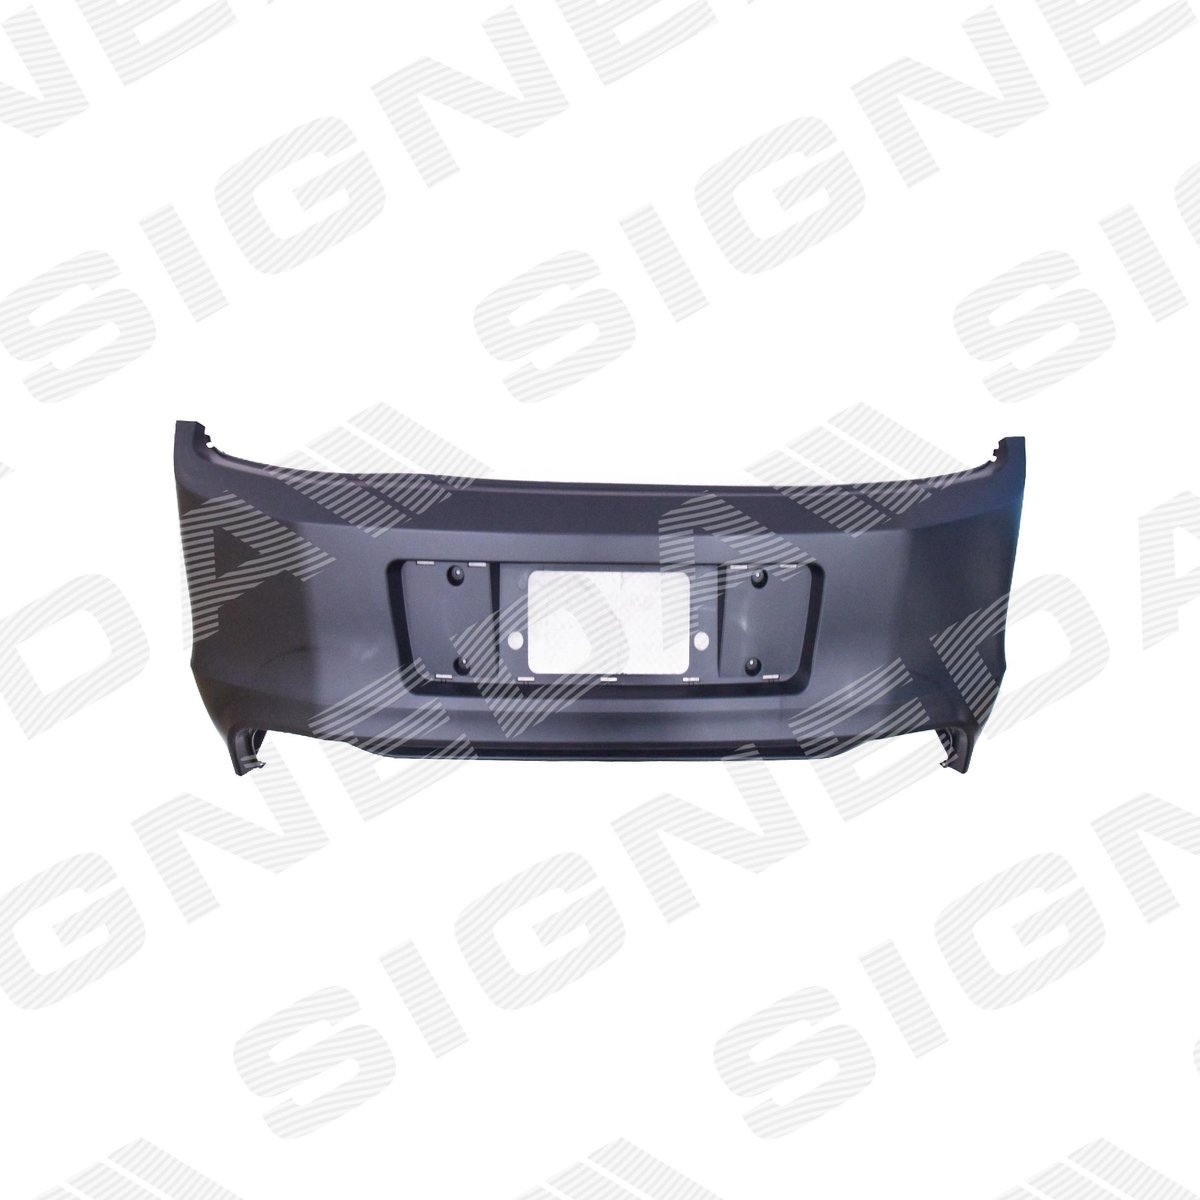 BUMPER ACHTER VOOR FORD MUSTANG 2010-2012 GT500 STYLE